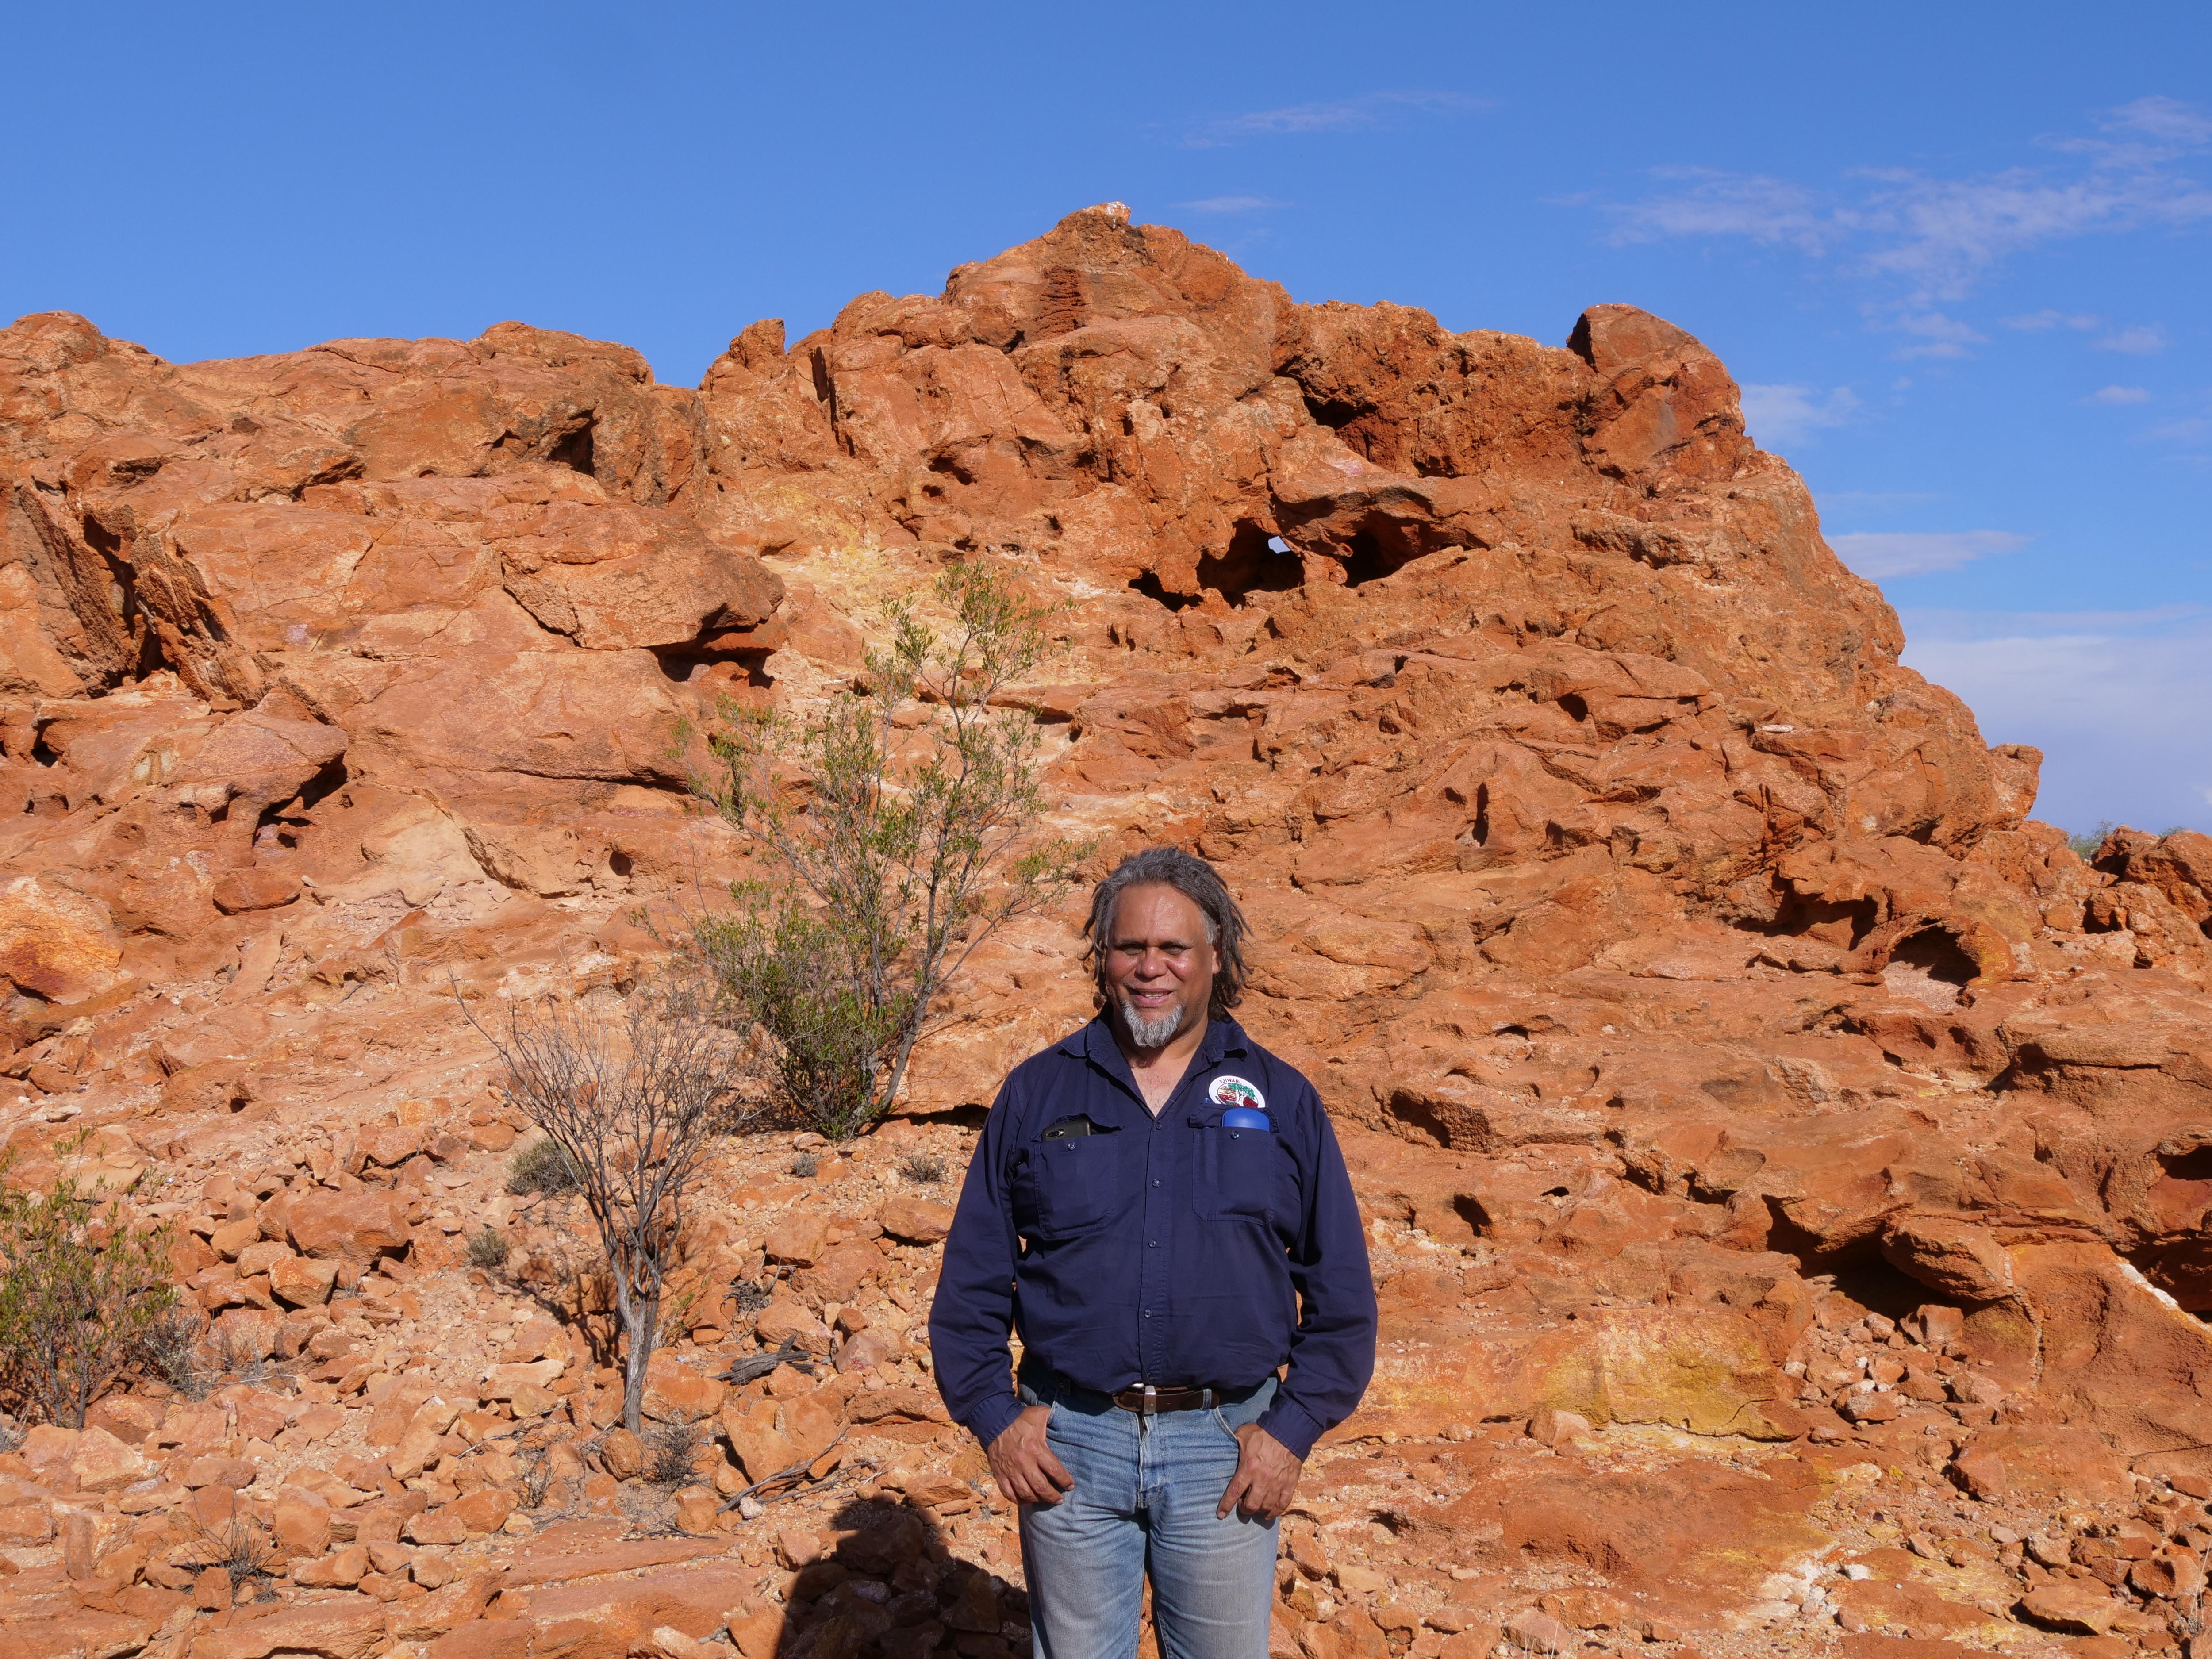 A man in blue shirt stands in front of a rocky outcrop in WA.